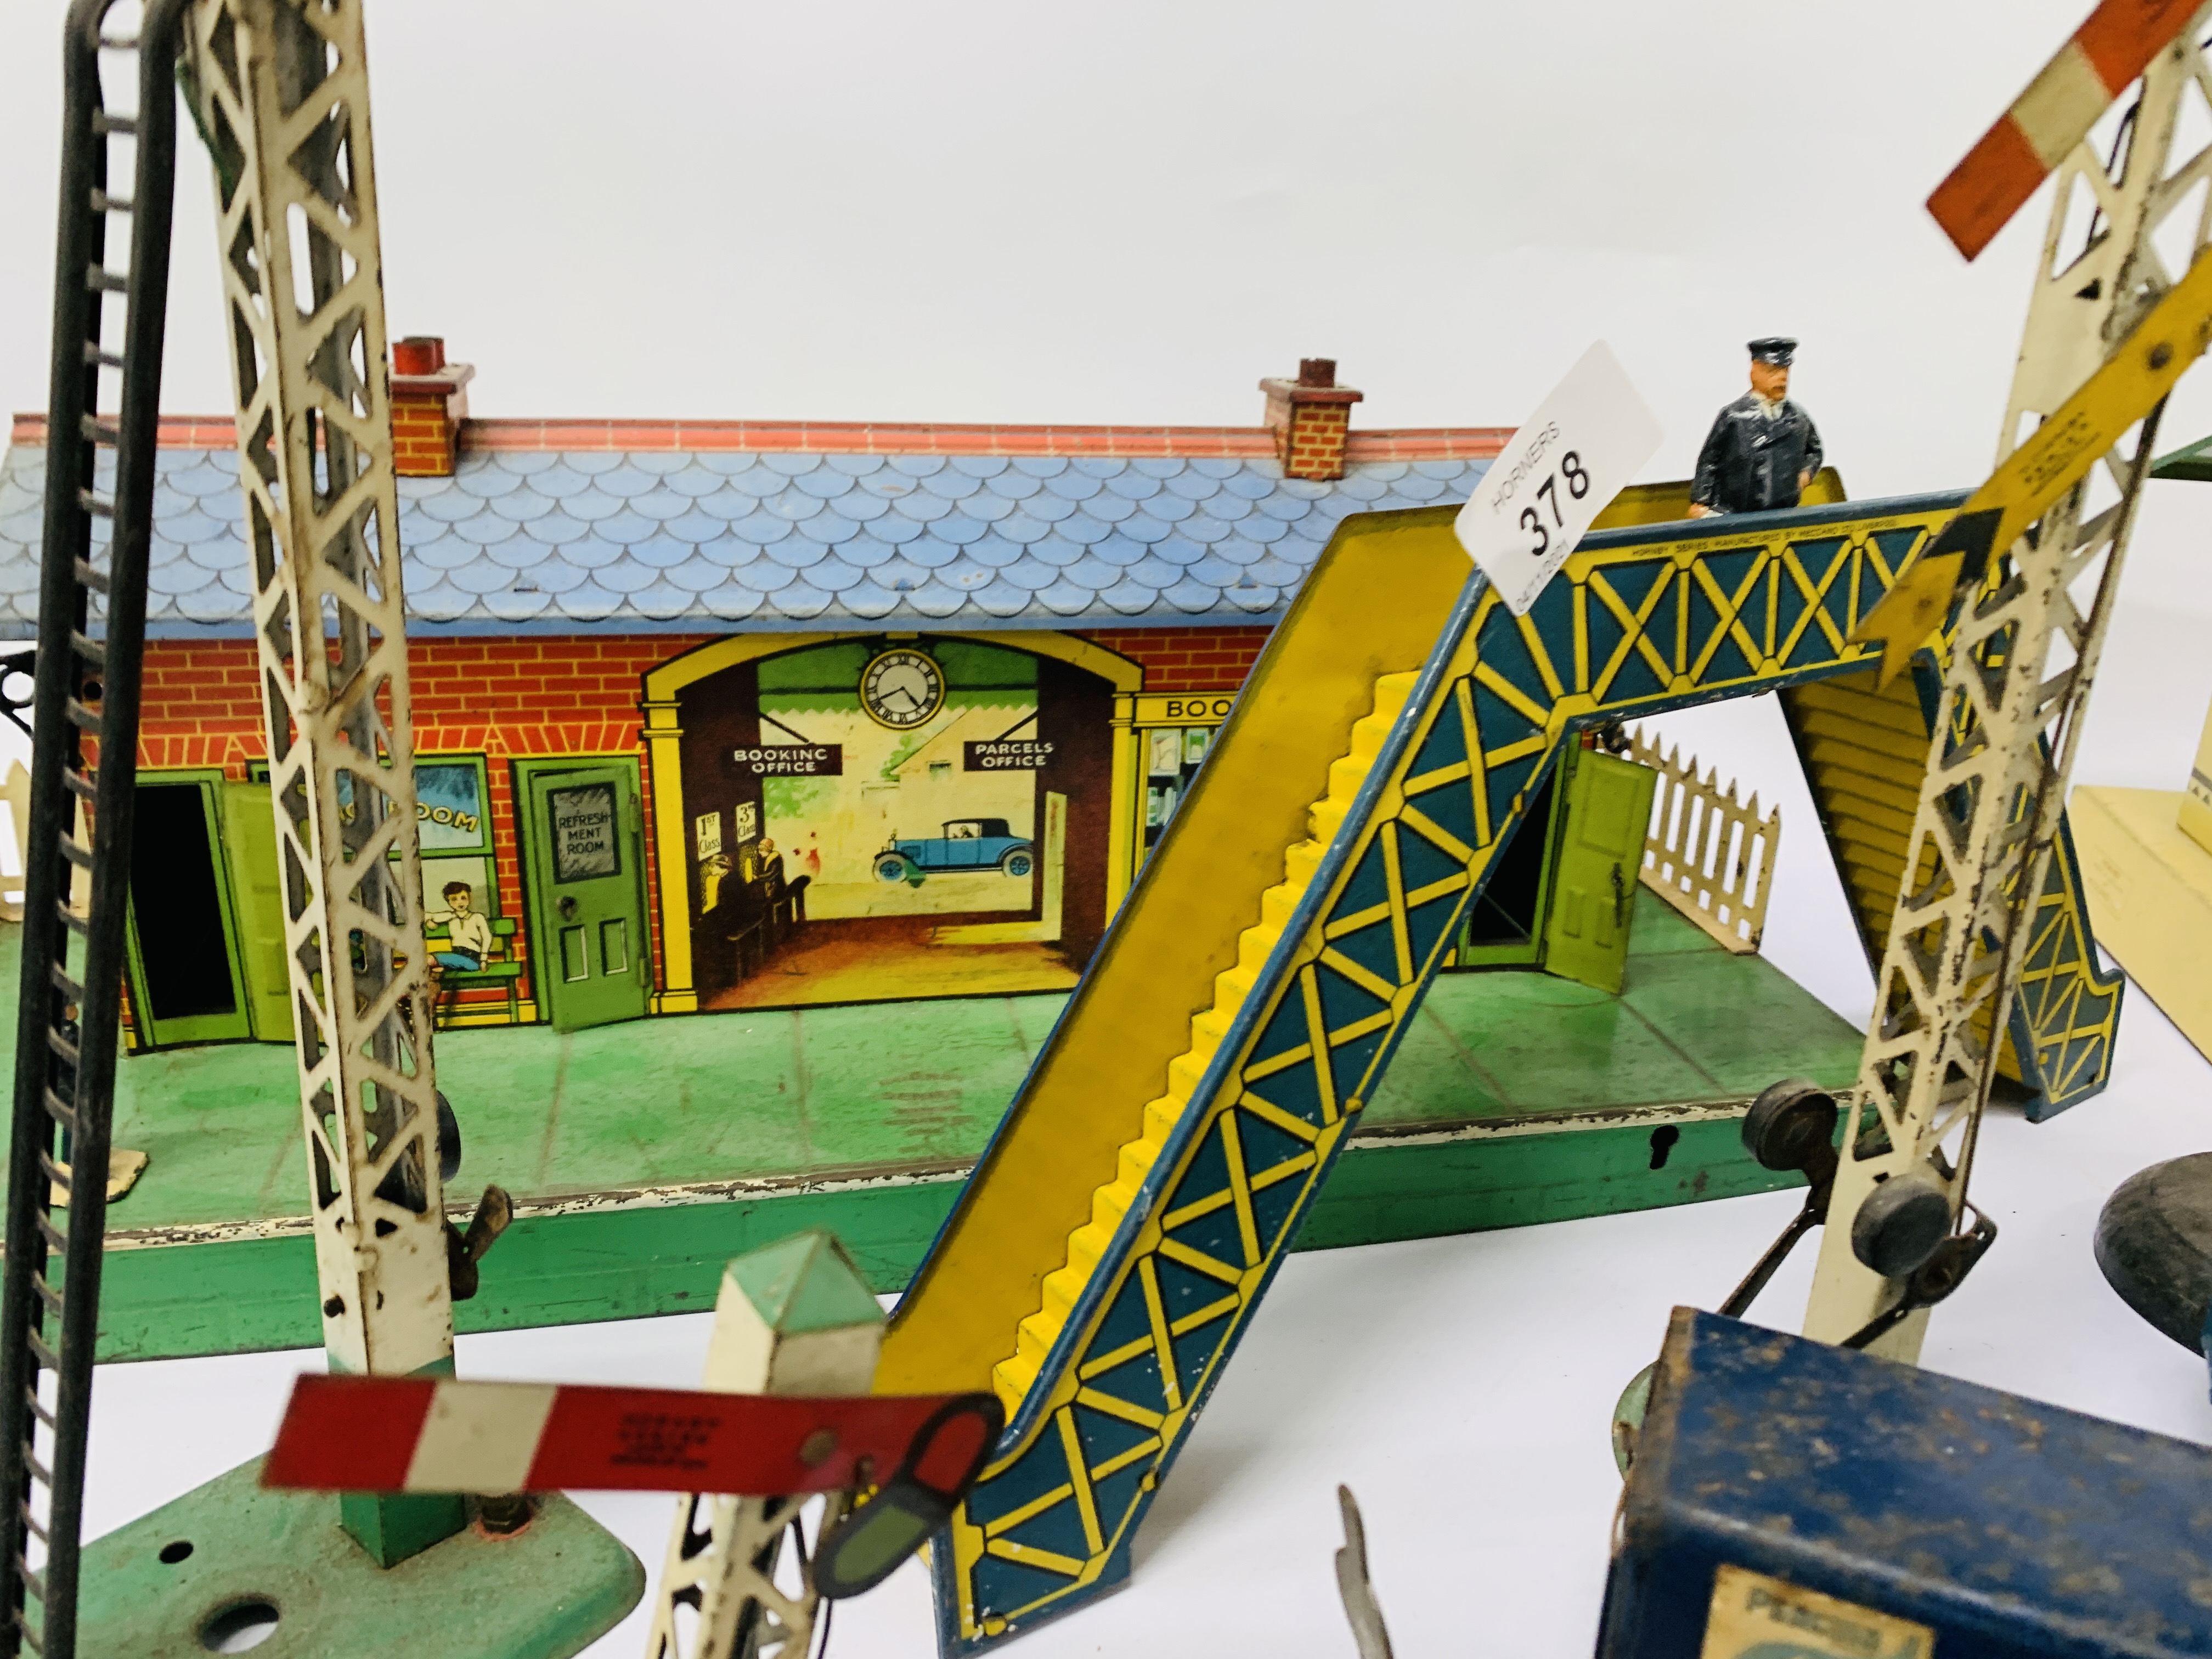 A COLLECTION OF HORNBY MECCANO TRACKSIDE BUILDINGS, BRIDGES, SIGNALS, 5 KEYS, VEHICLES ETC. - Image 3 of 23